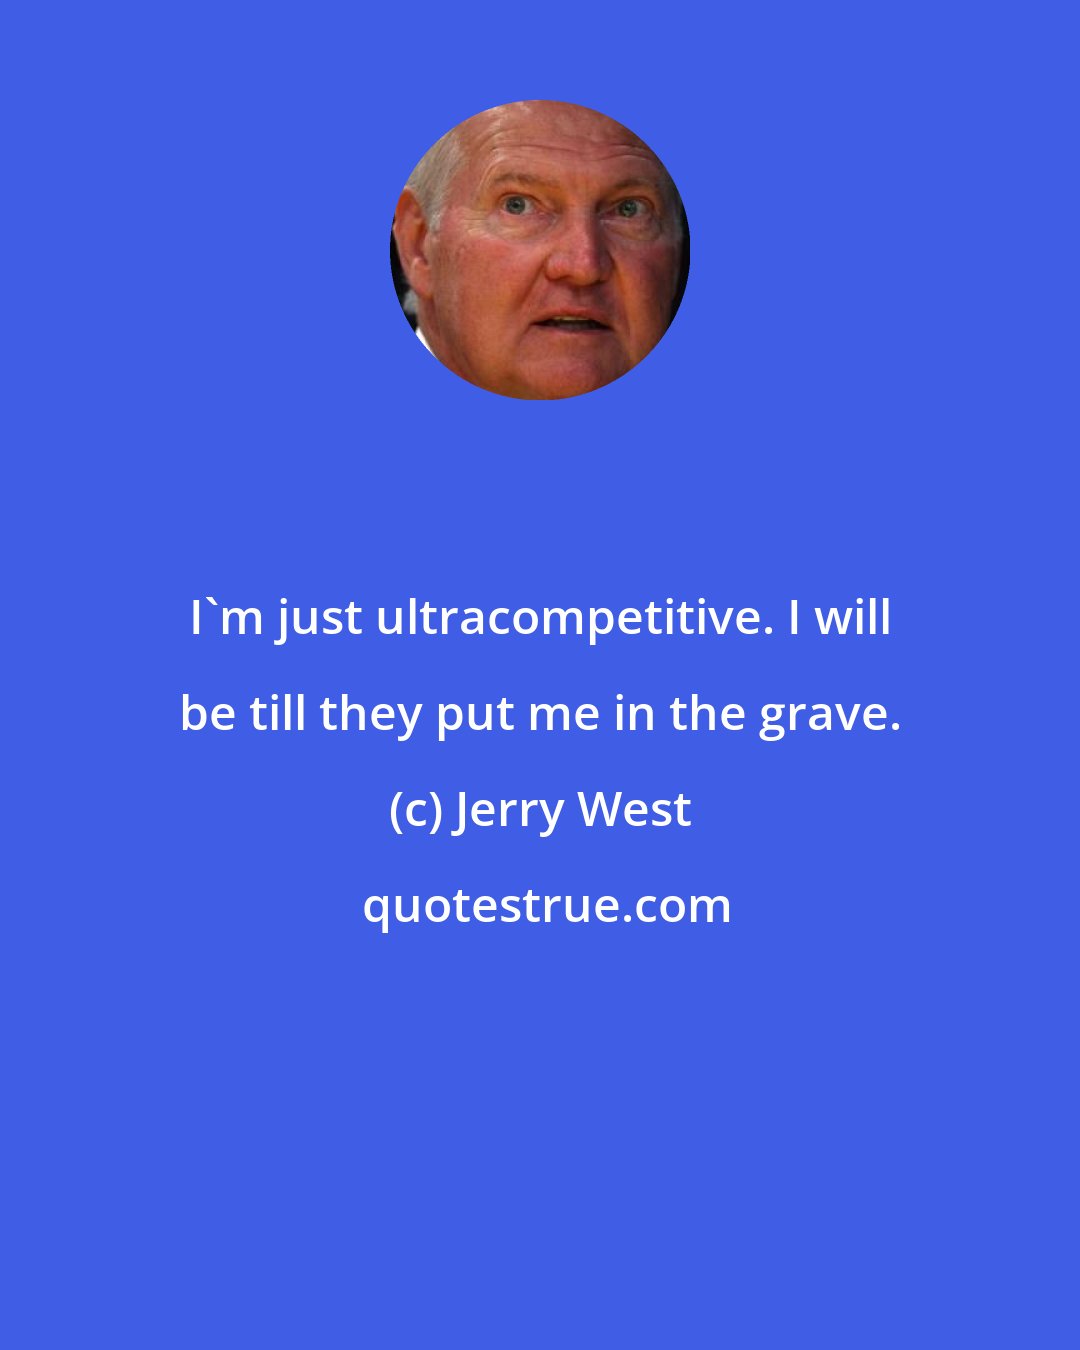 Jerry West: I'm just ultracompetitive. I will be till they put me in the grave.